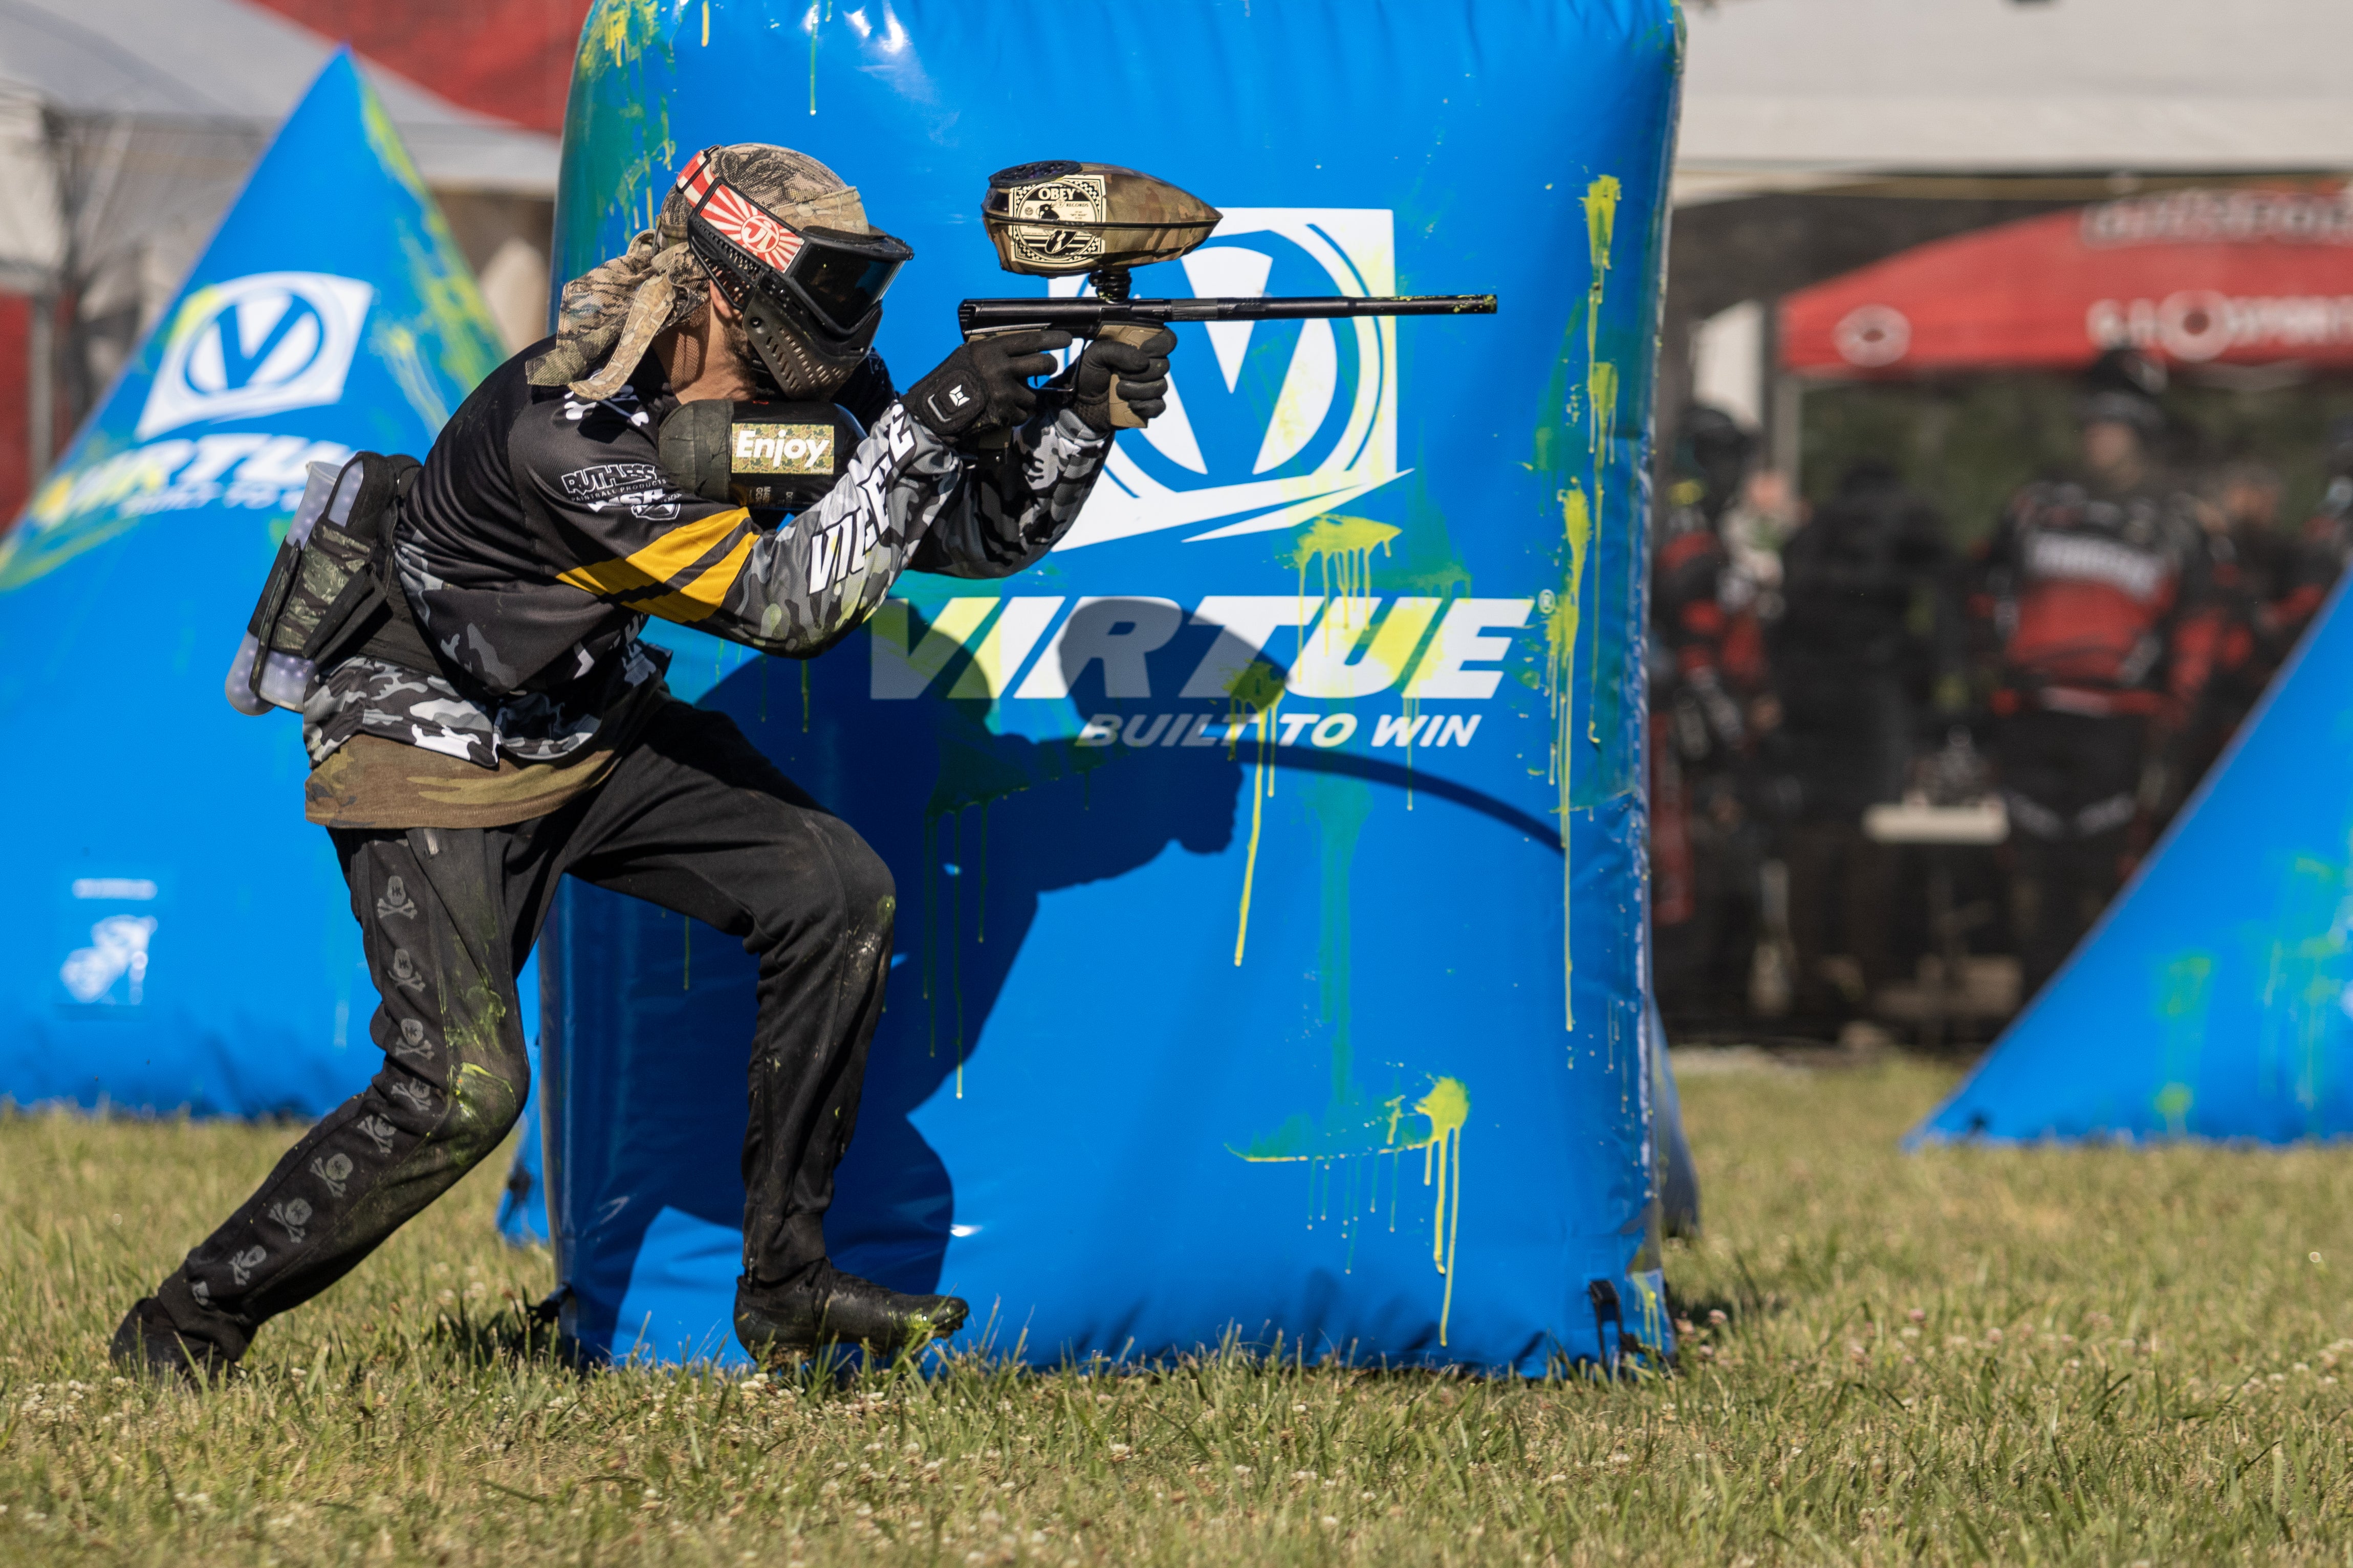 What Is Popular In Paintball Right Now?